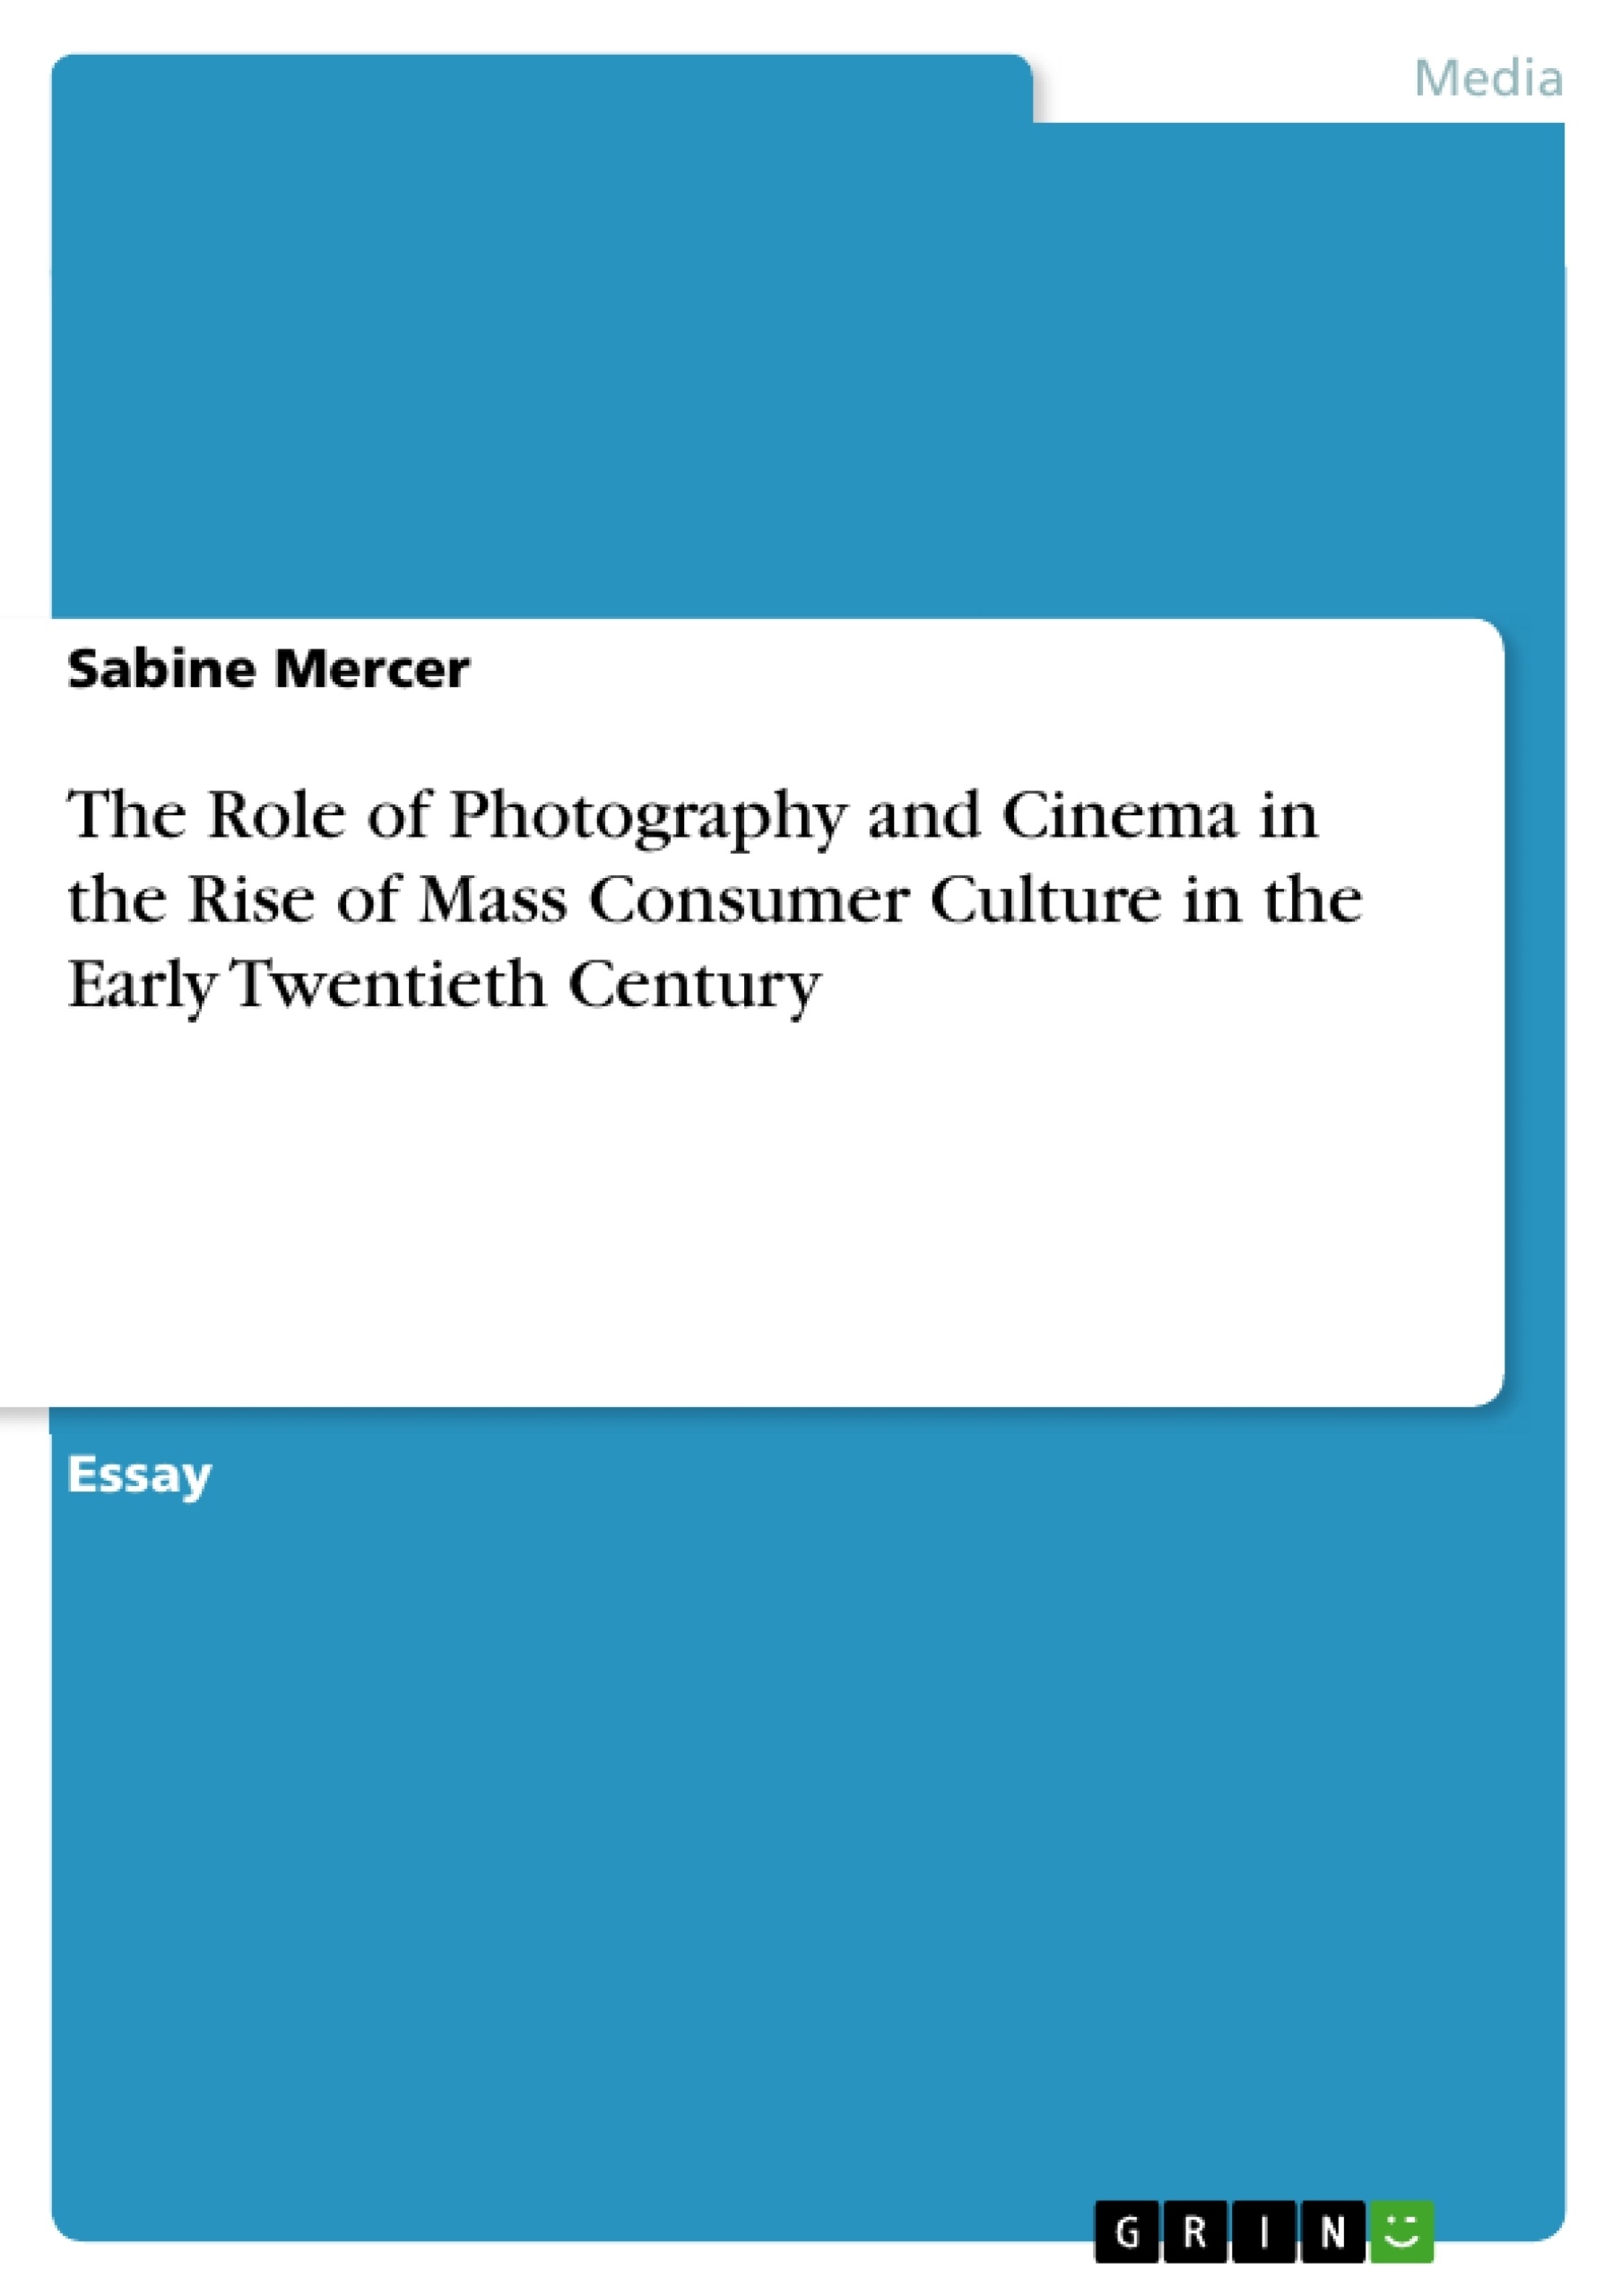 Title: The Role of Photography and Cinema in the Rise of Mass Consumer Culture in the Early Twentieth Century